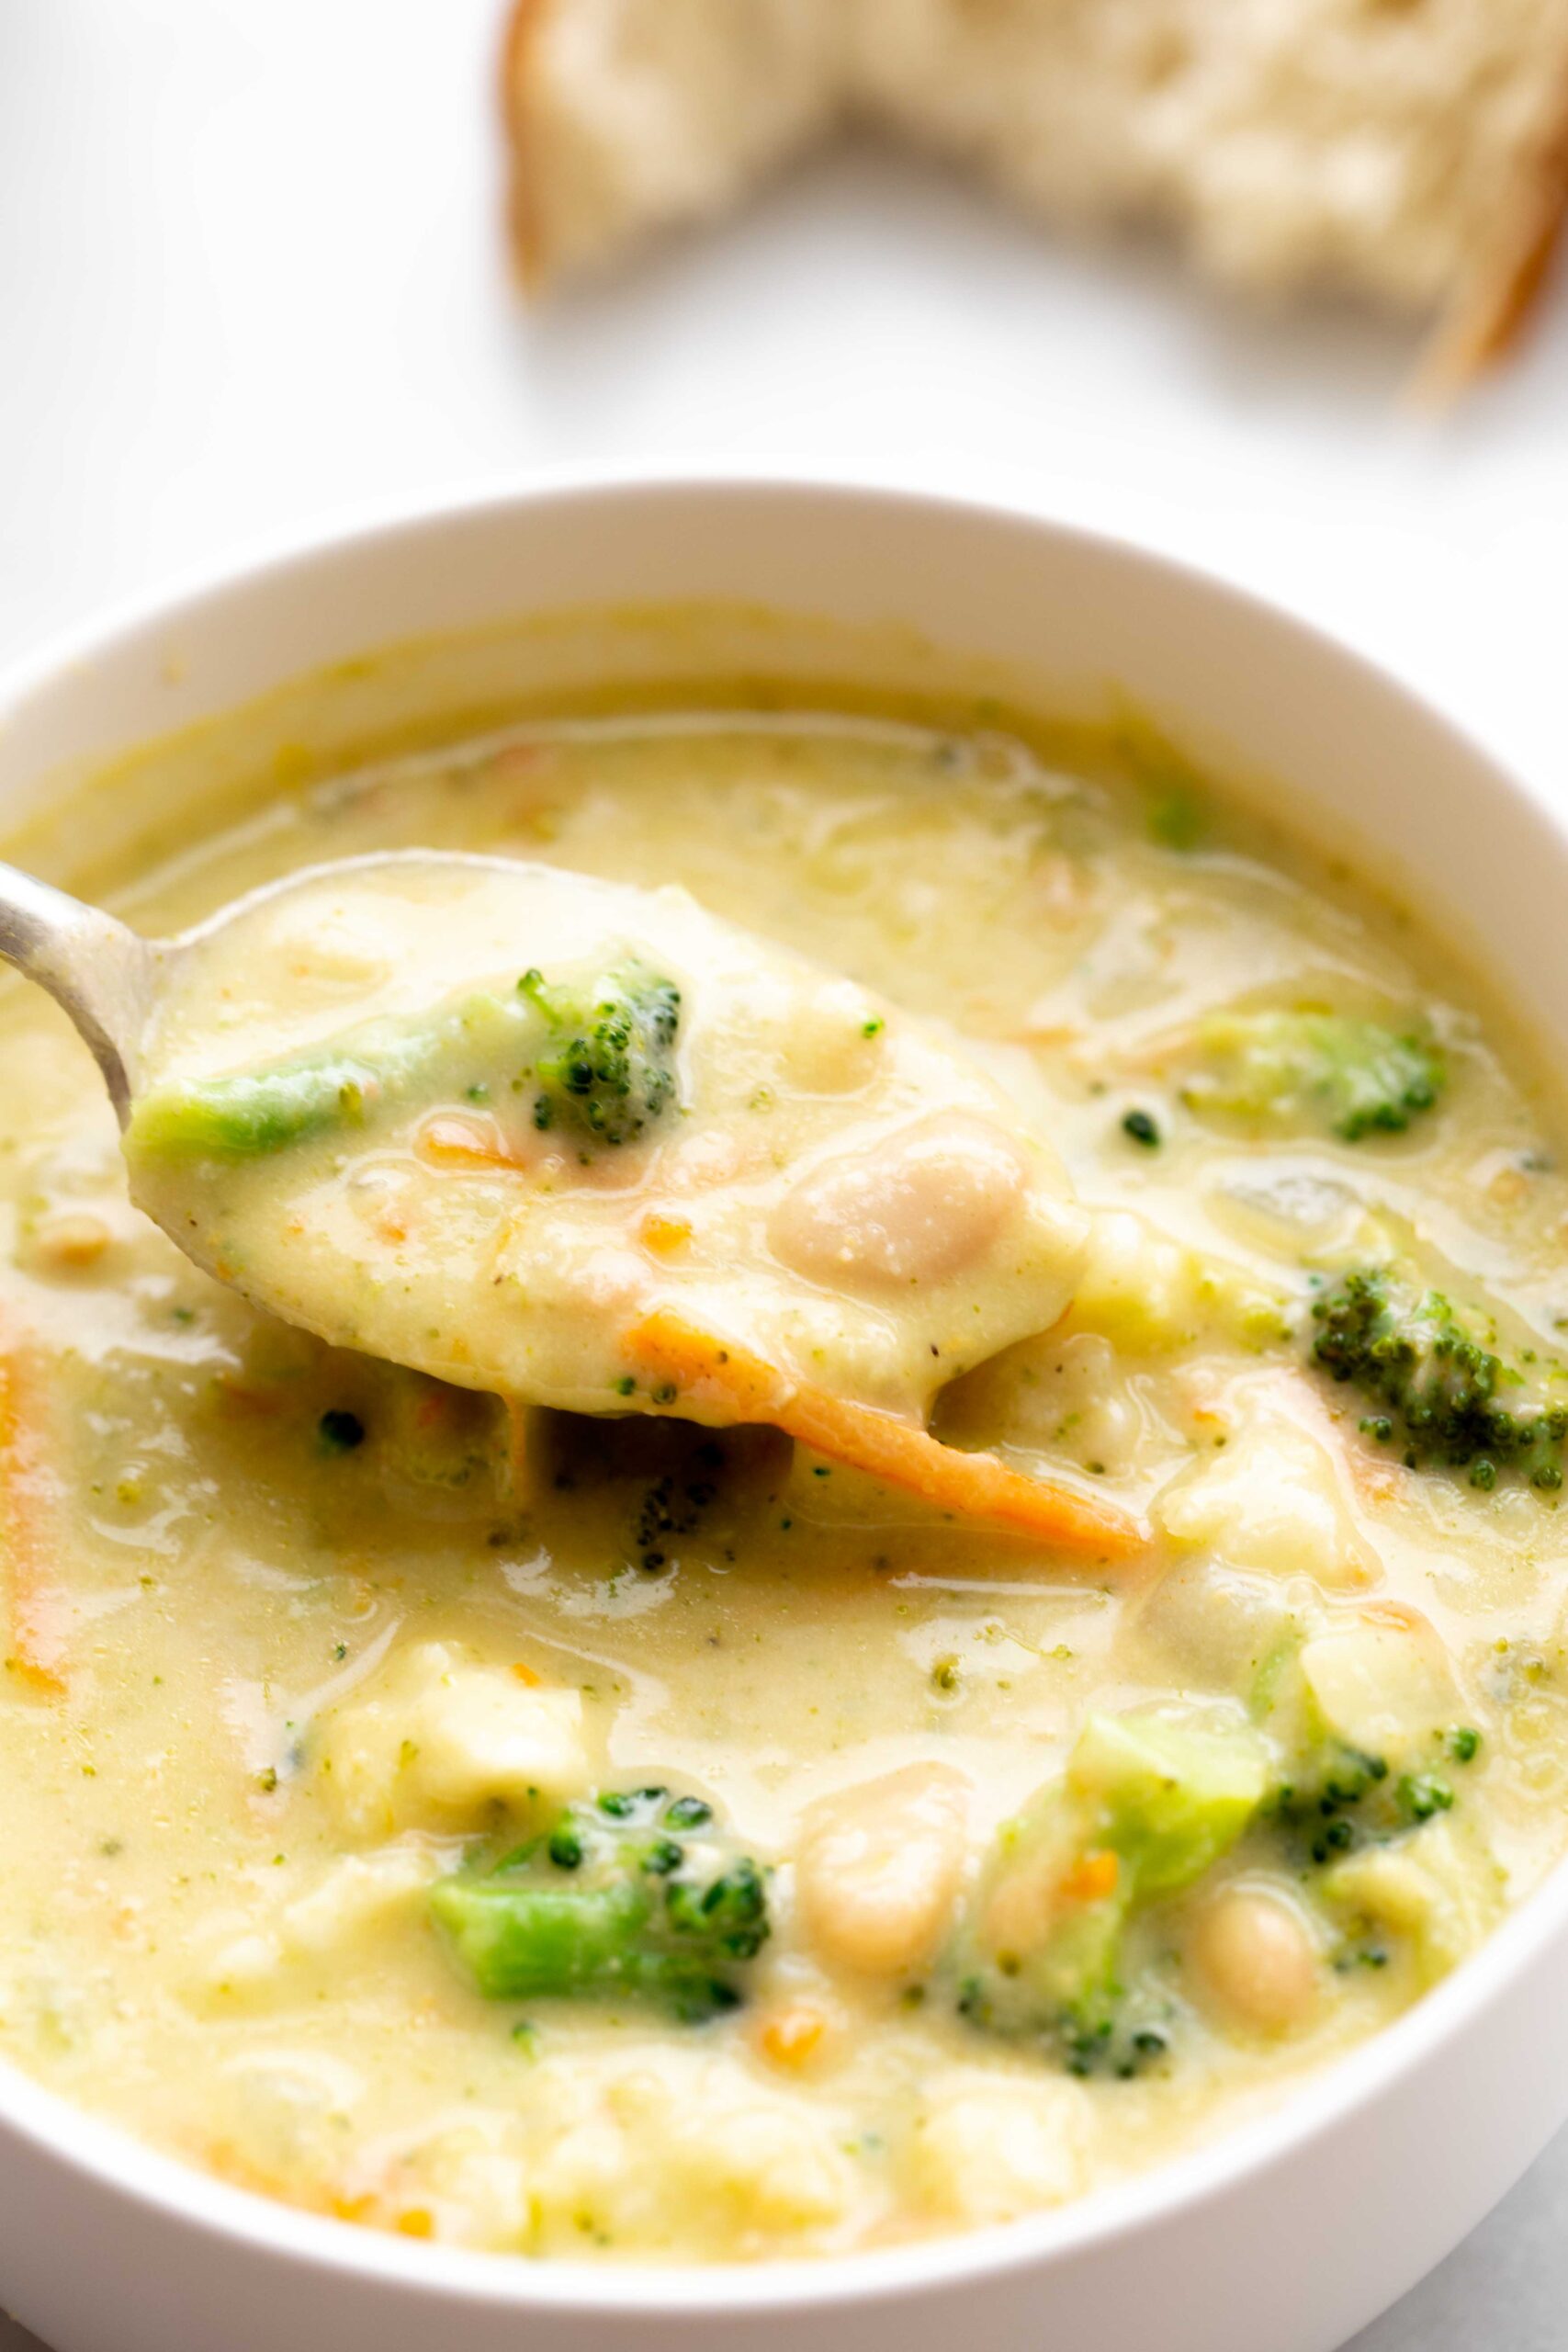 closeup photo of a spoonful of creamy broccoli cauliflower cheese soup with carrot and white beans